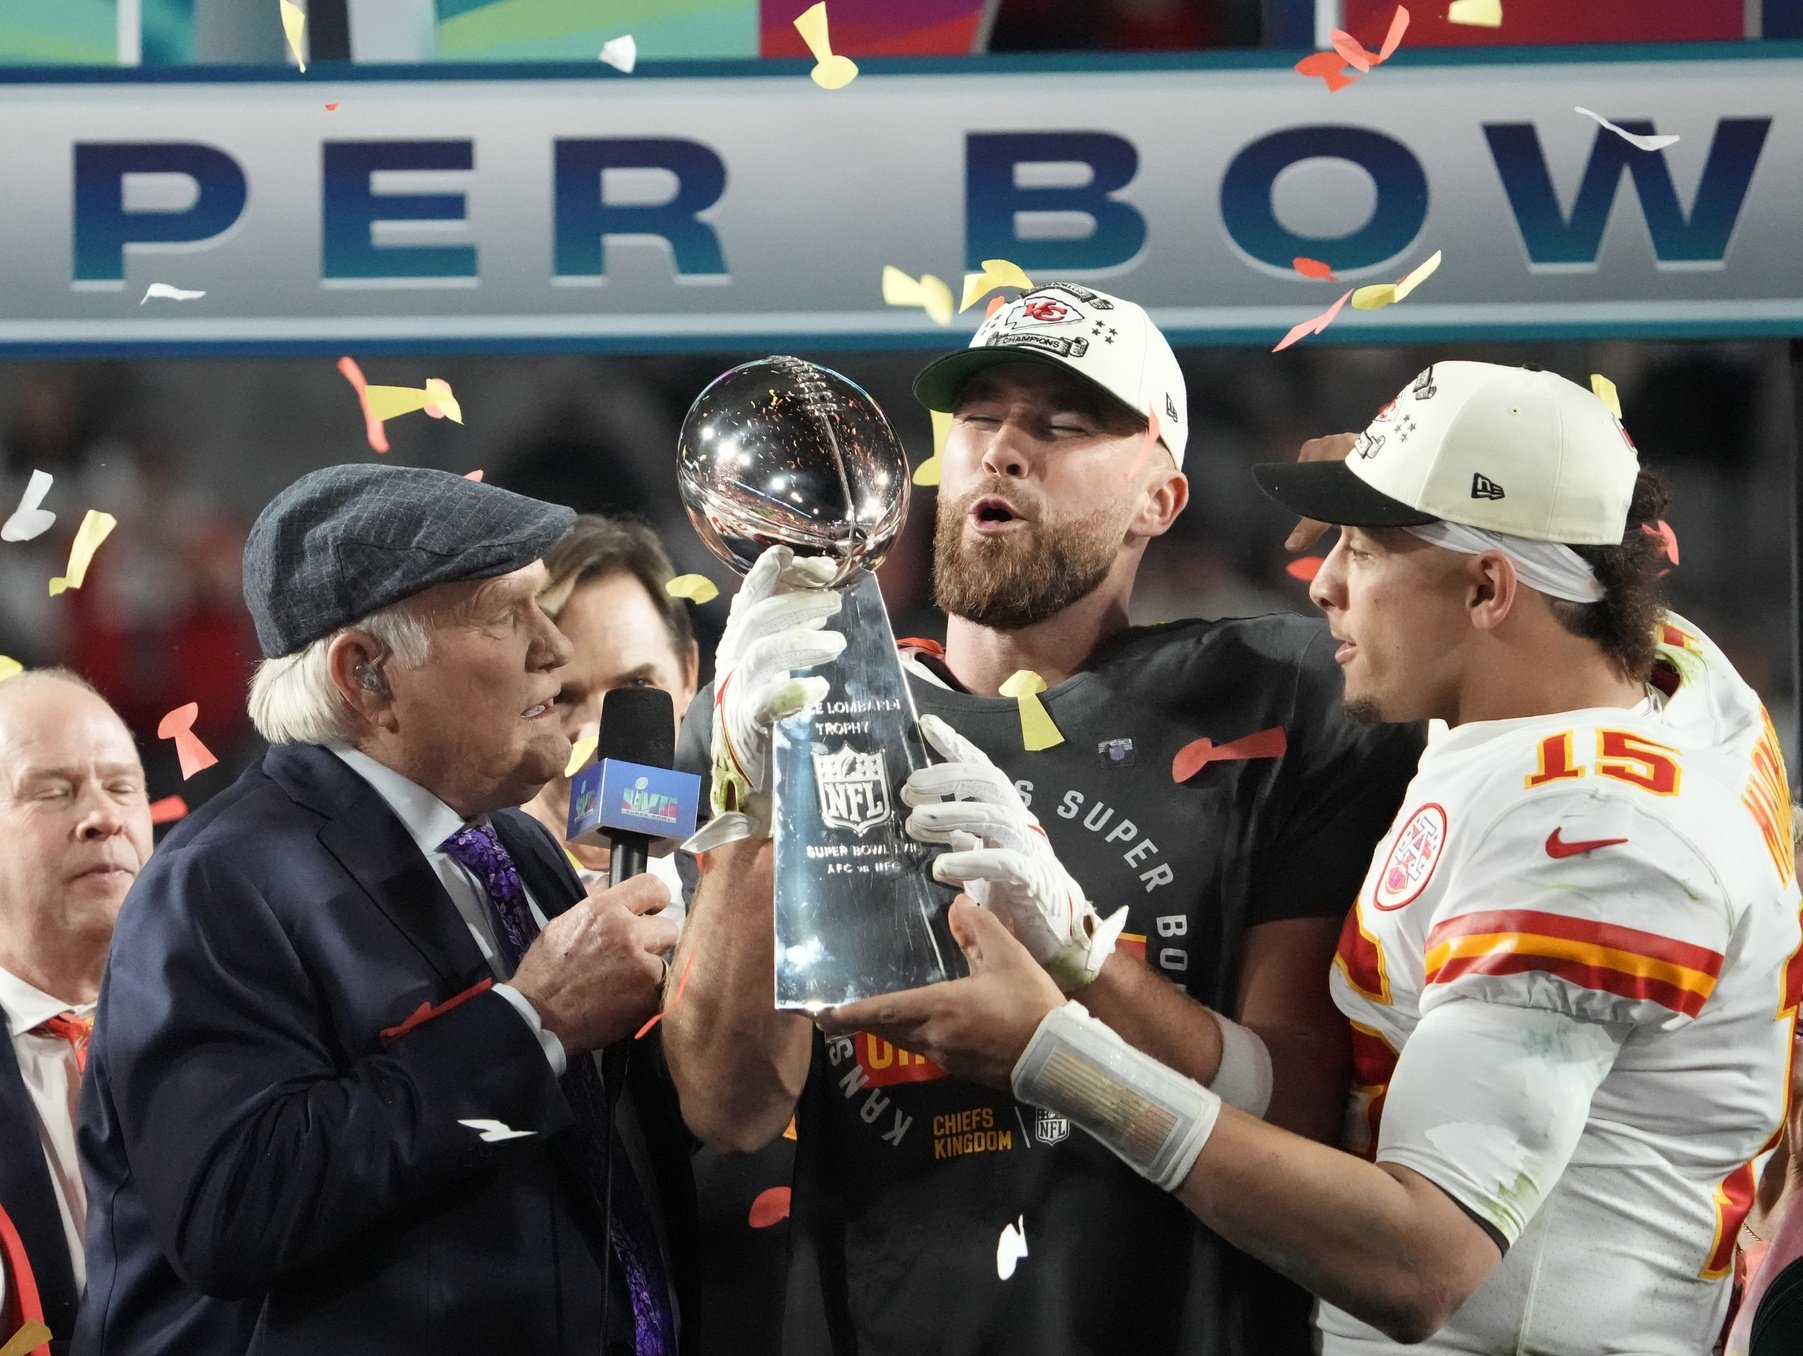 Kansas City Chiefs quarterback Patrick Mahomes (15) passes the the Lombardi Trophy to tight end Travis Kelce (87) after defeating the Philadelphia Eagles in Super Bowl LVII at State Farm Stadium.